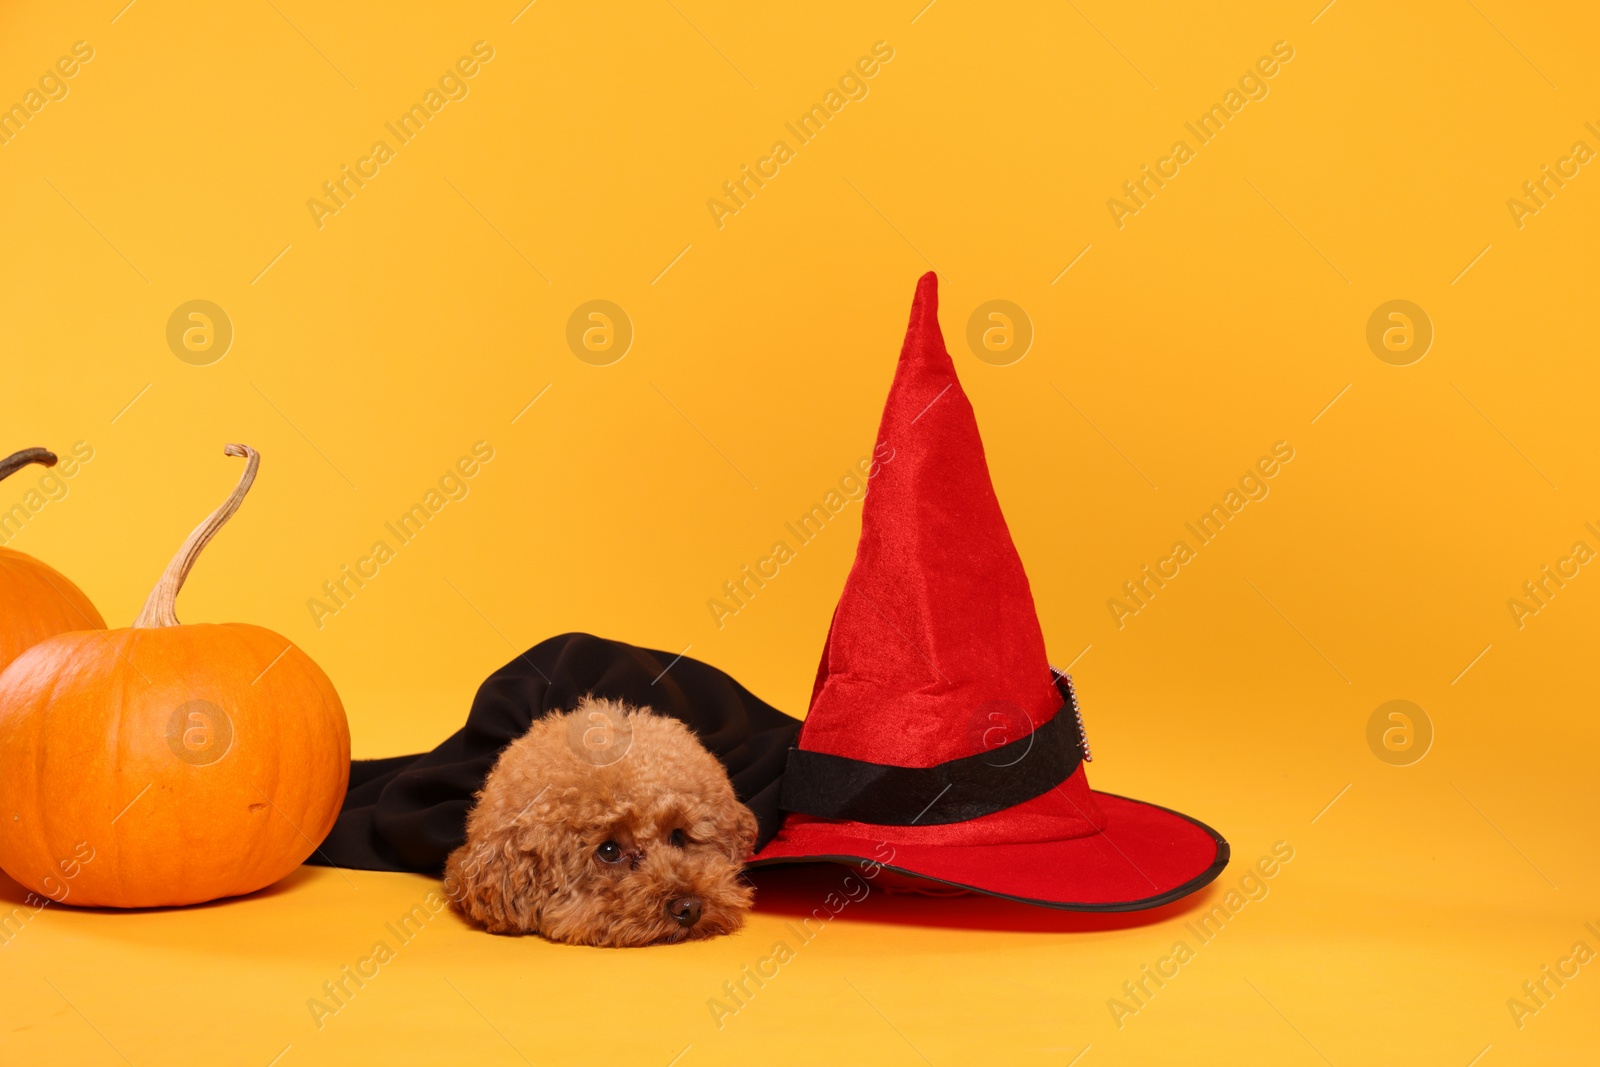 Photo of Cute Maltipoo dog with hat and pumpkins dressed in Halloween costume on orange background, space for text